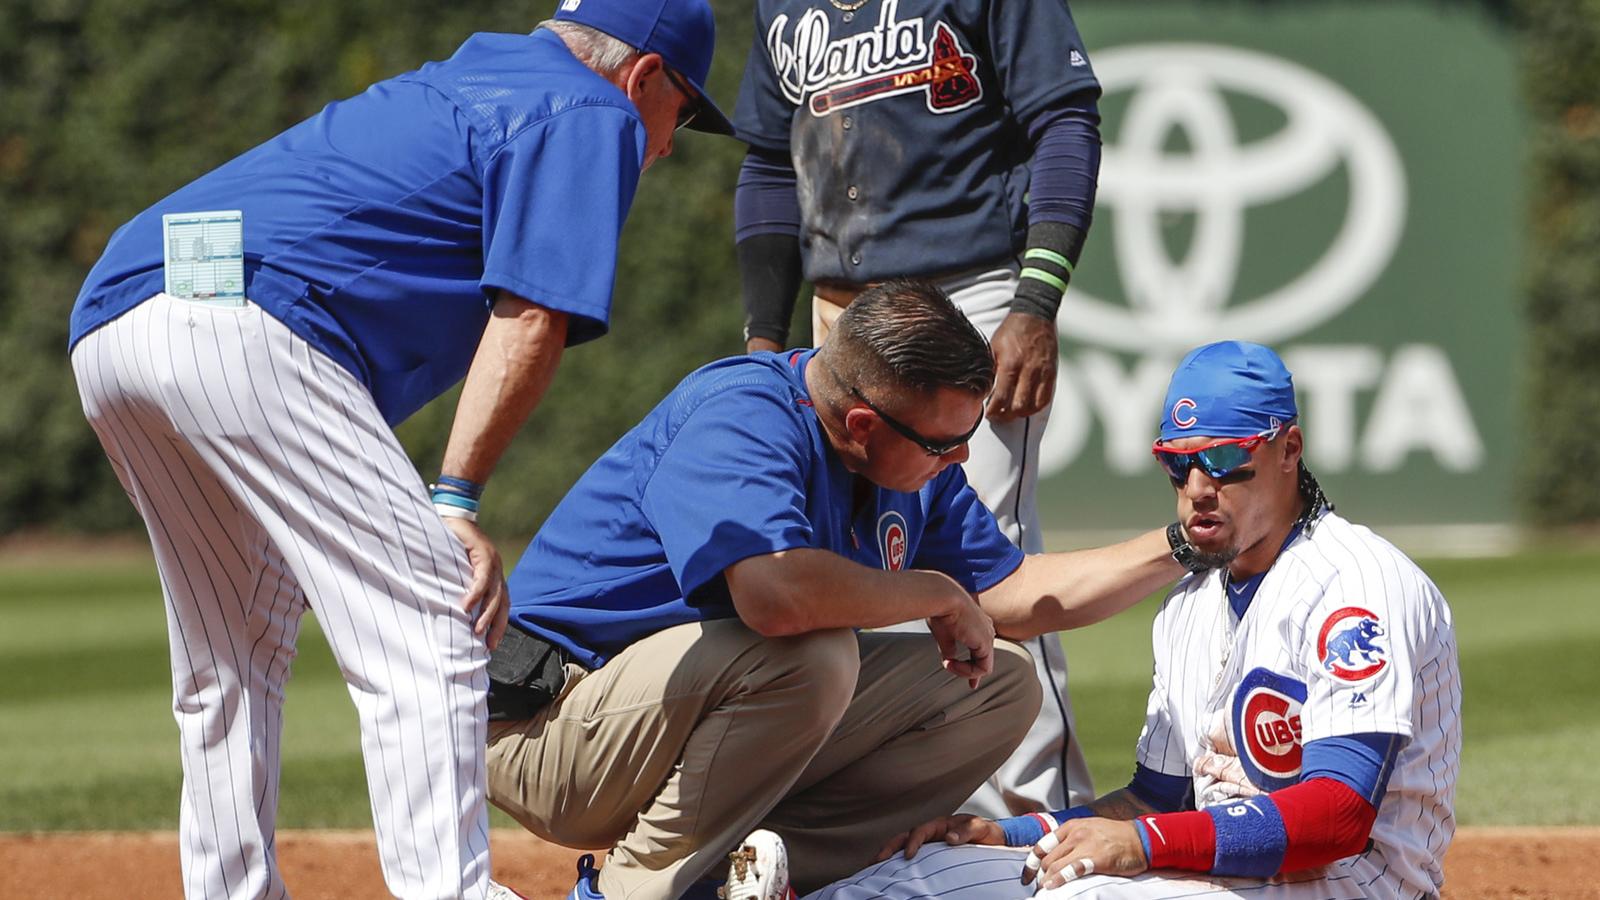 Javy Baez escapes serious injury after taking knee to head